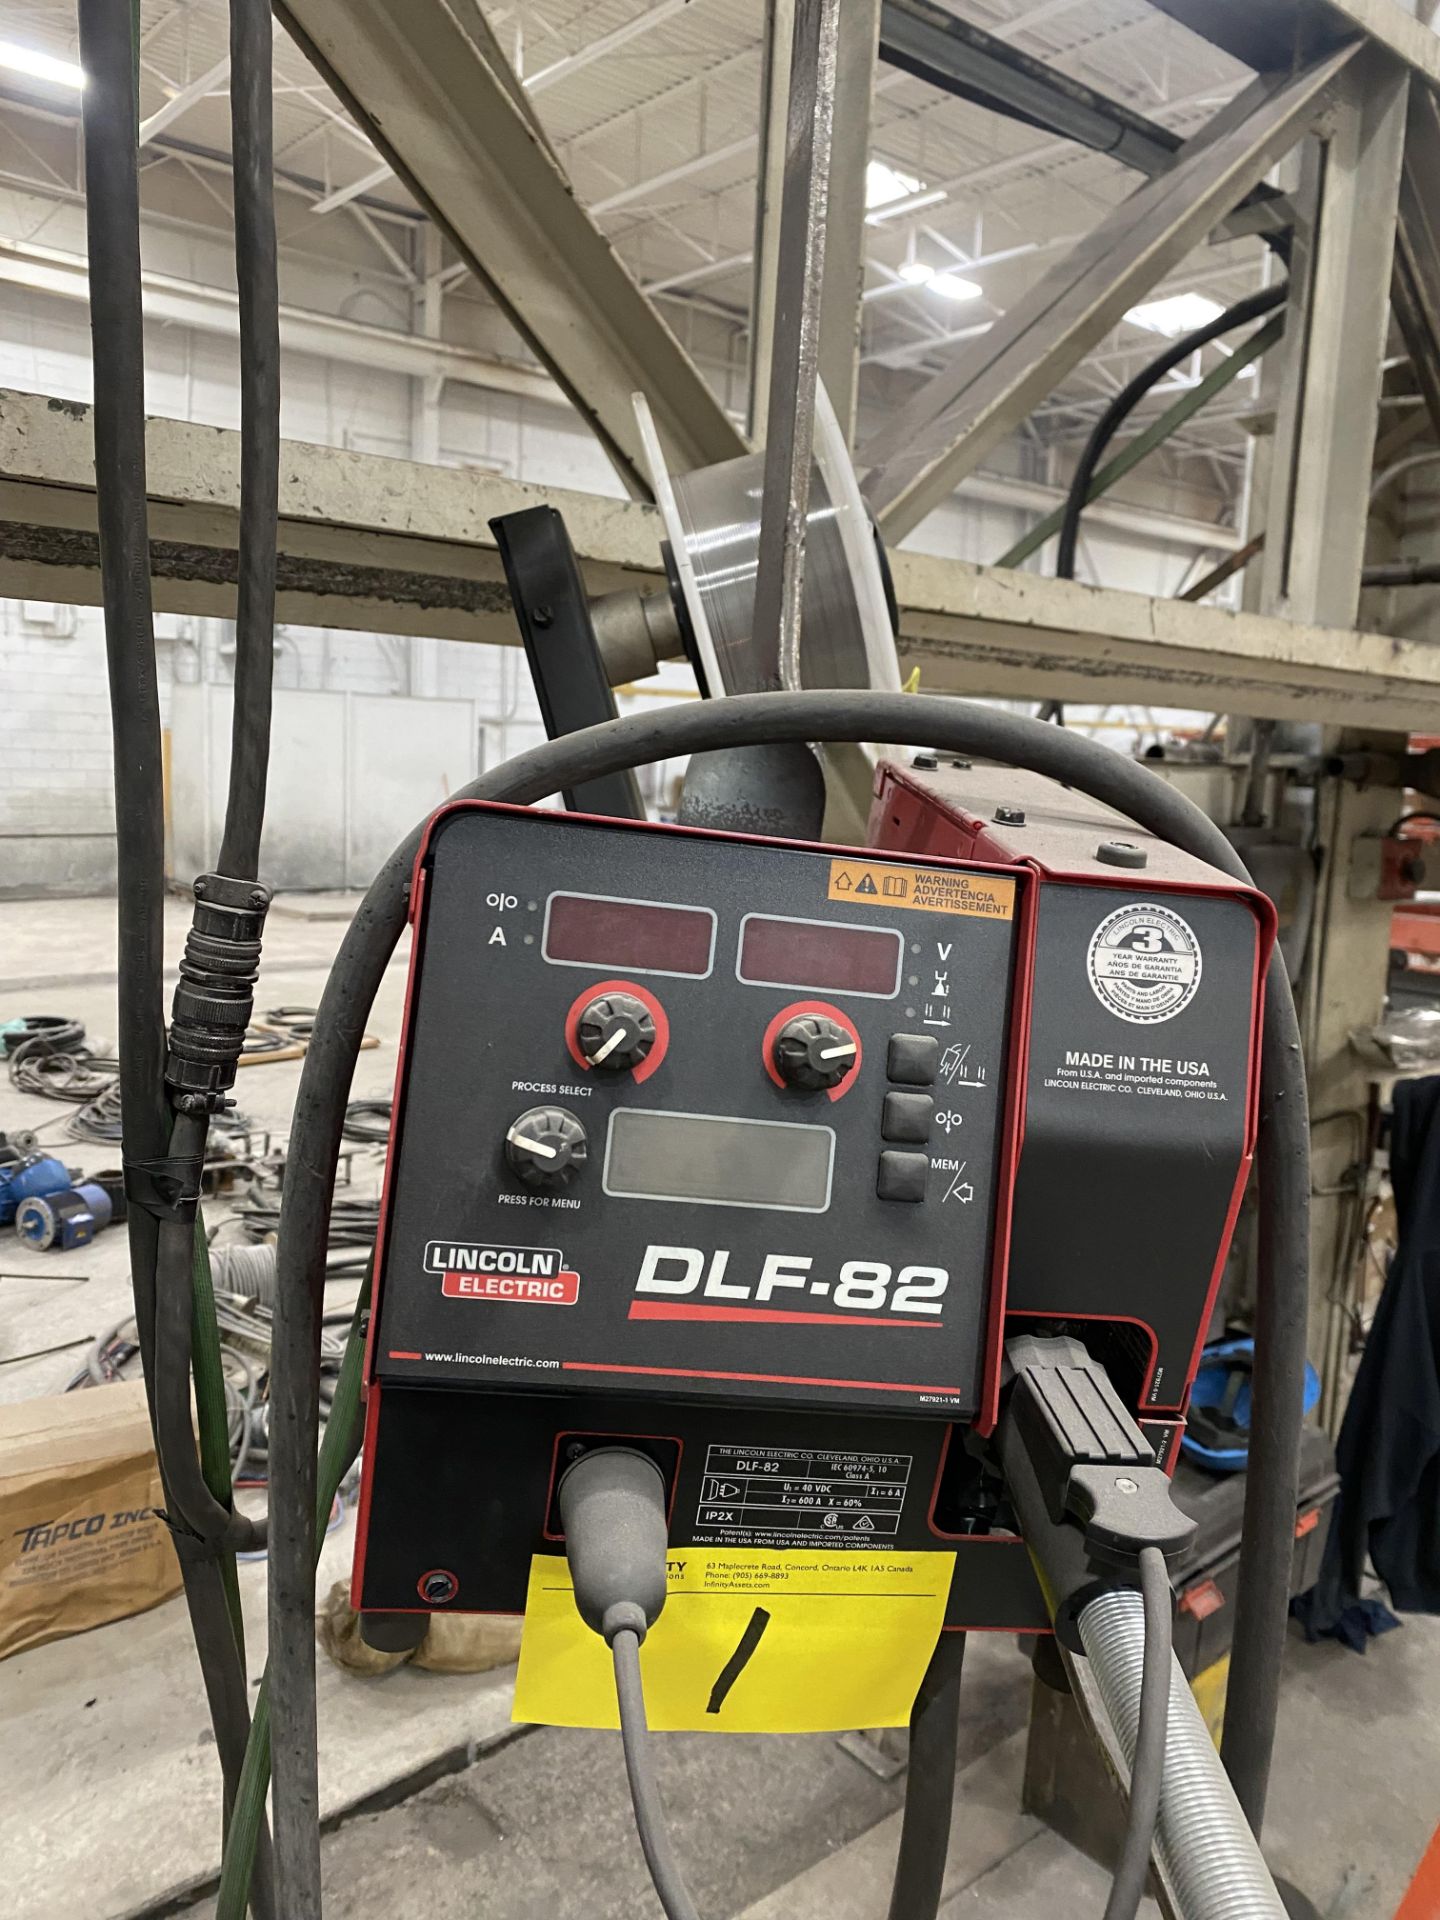 LINCOLN ELECTRIC FLEXTEC 650X MIG WELDER W/ LINCOLN ELECTRIC DLF-82 WIRE FEEDER, CABLES, STAND - Image 4 of 5